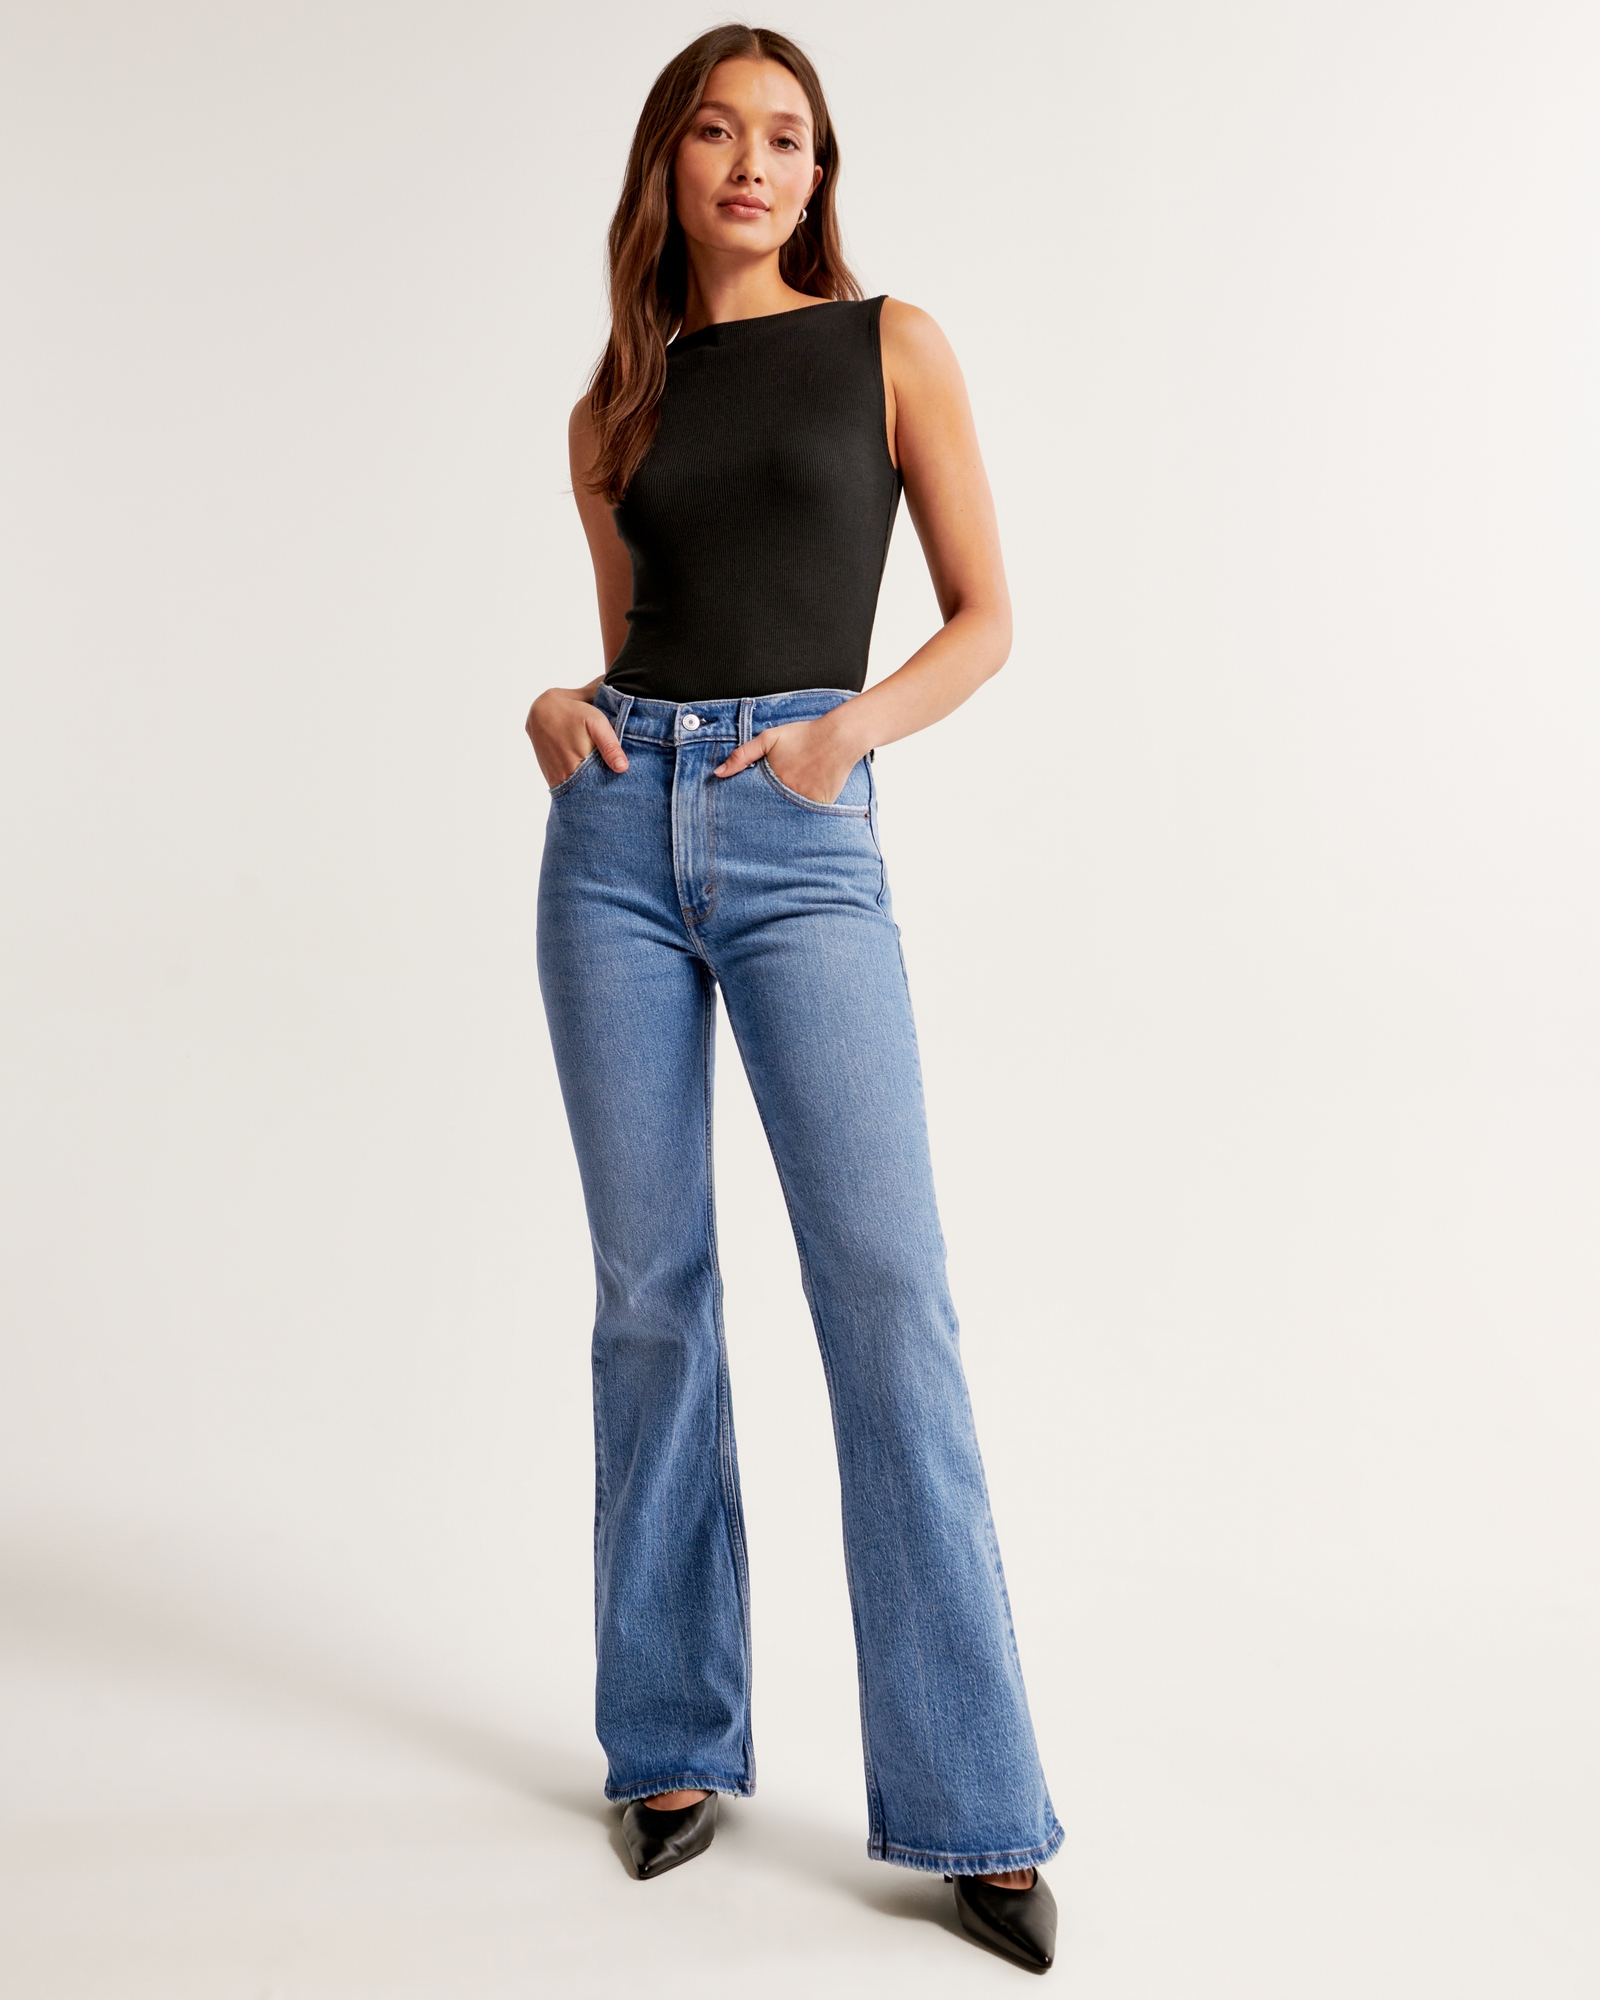 Women's Flared Jeans Fashion Vintage Casual High Waist Flare Pants – Arimonz